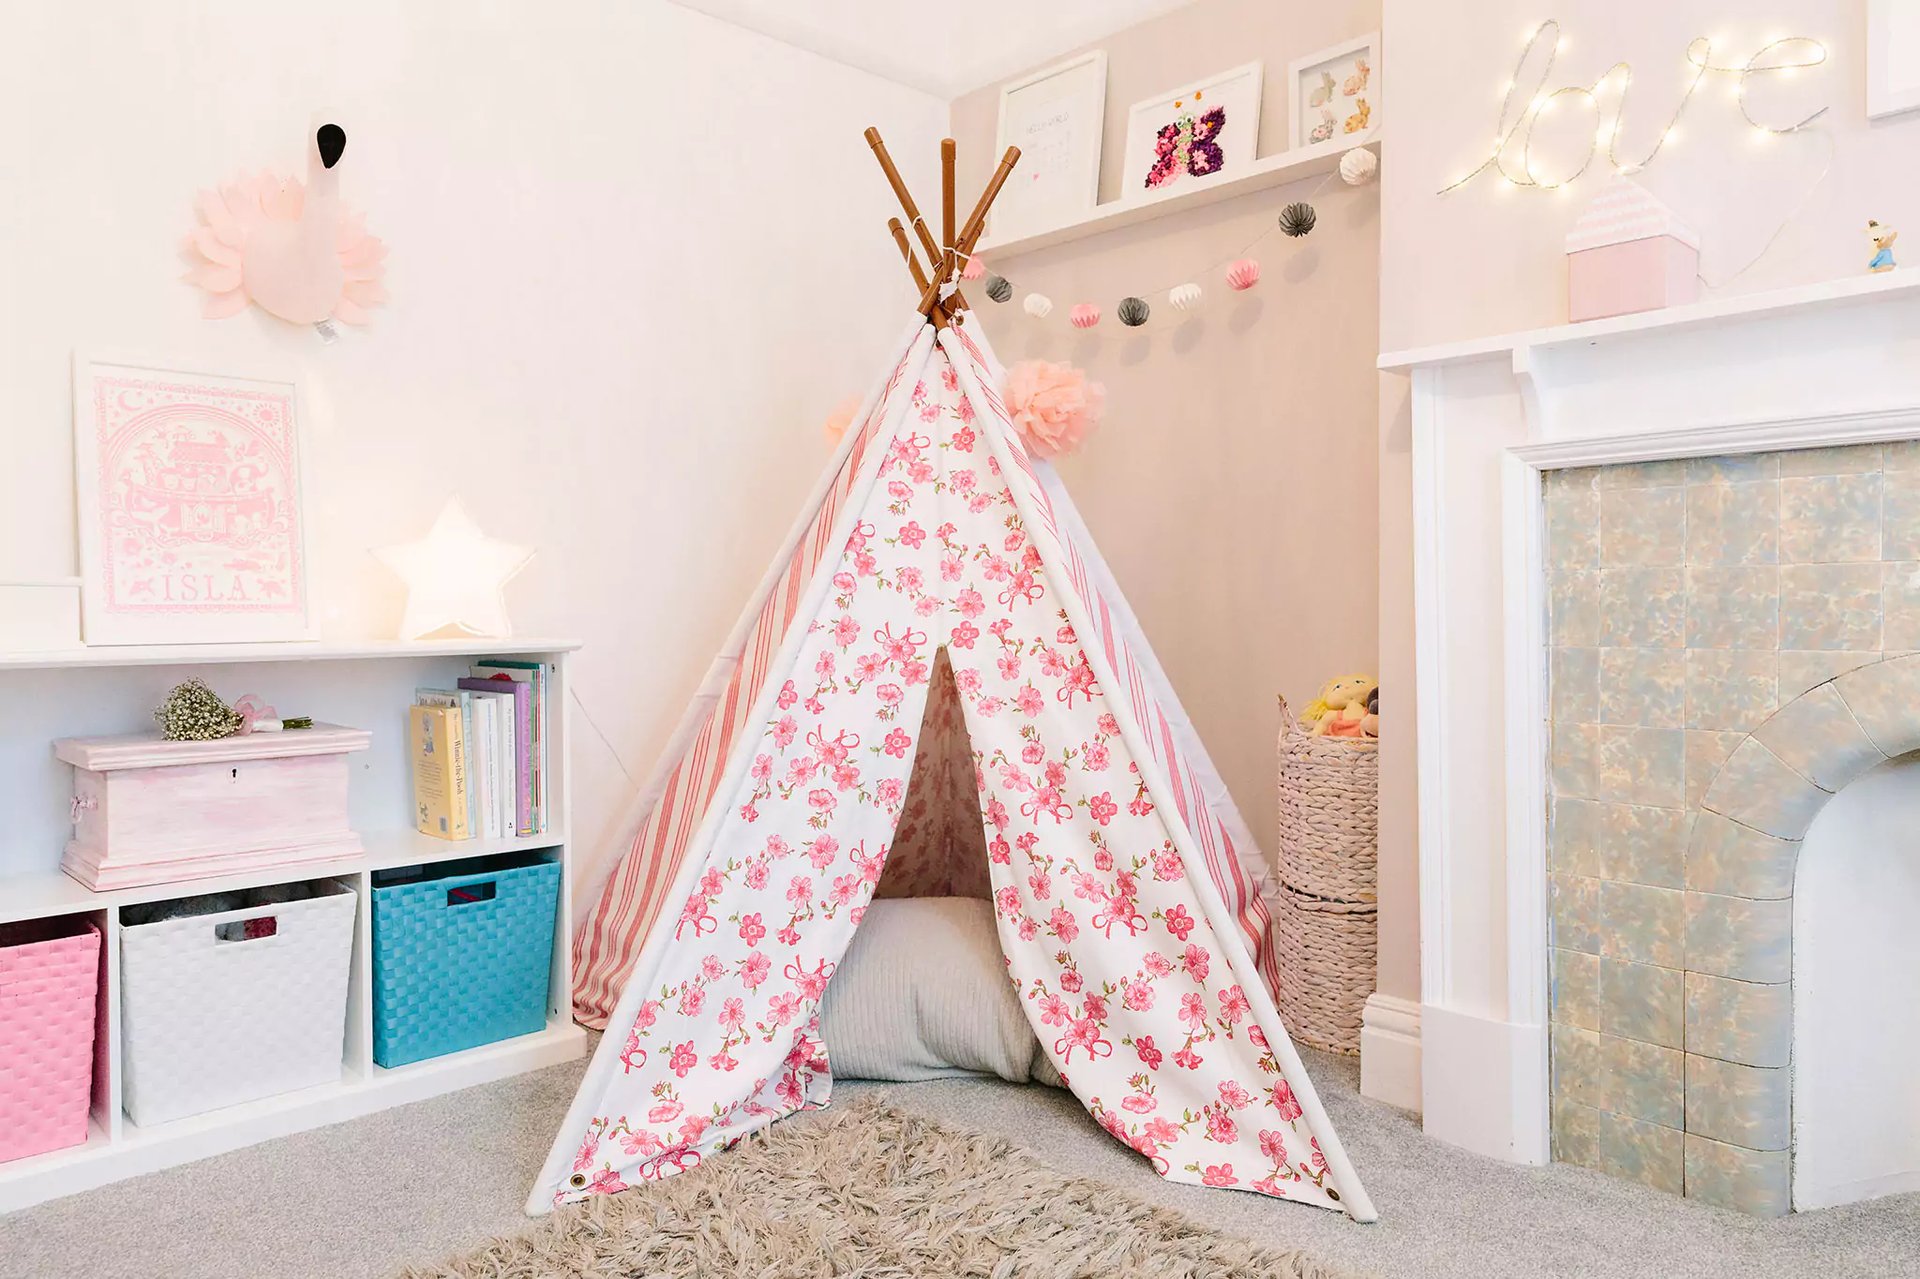 Kid's pink teepee | Children's bedroom on a budget